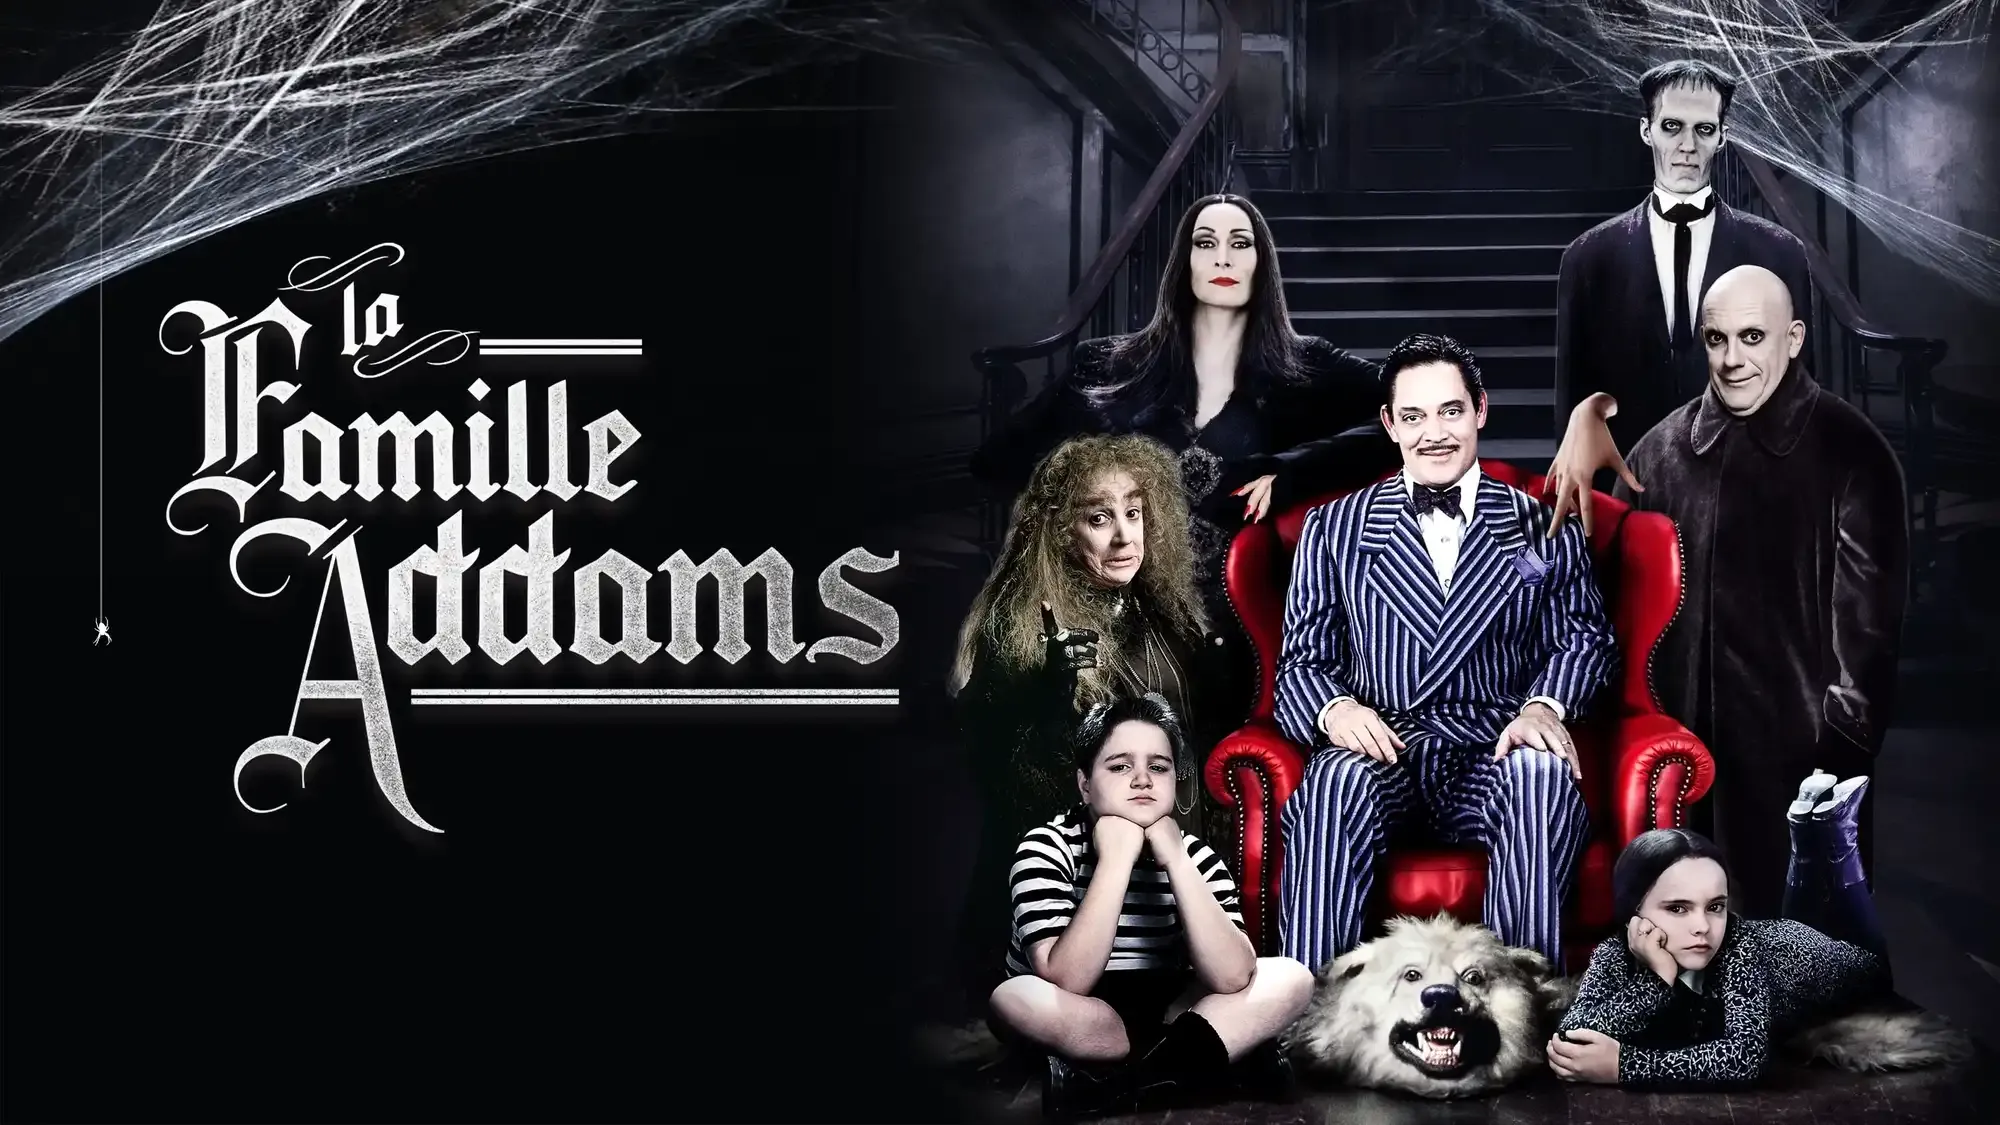 The Addams Family movie review